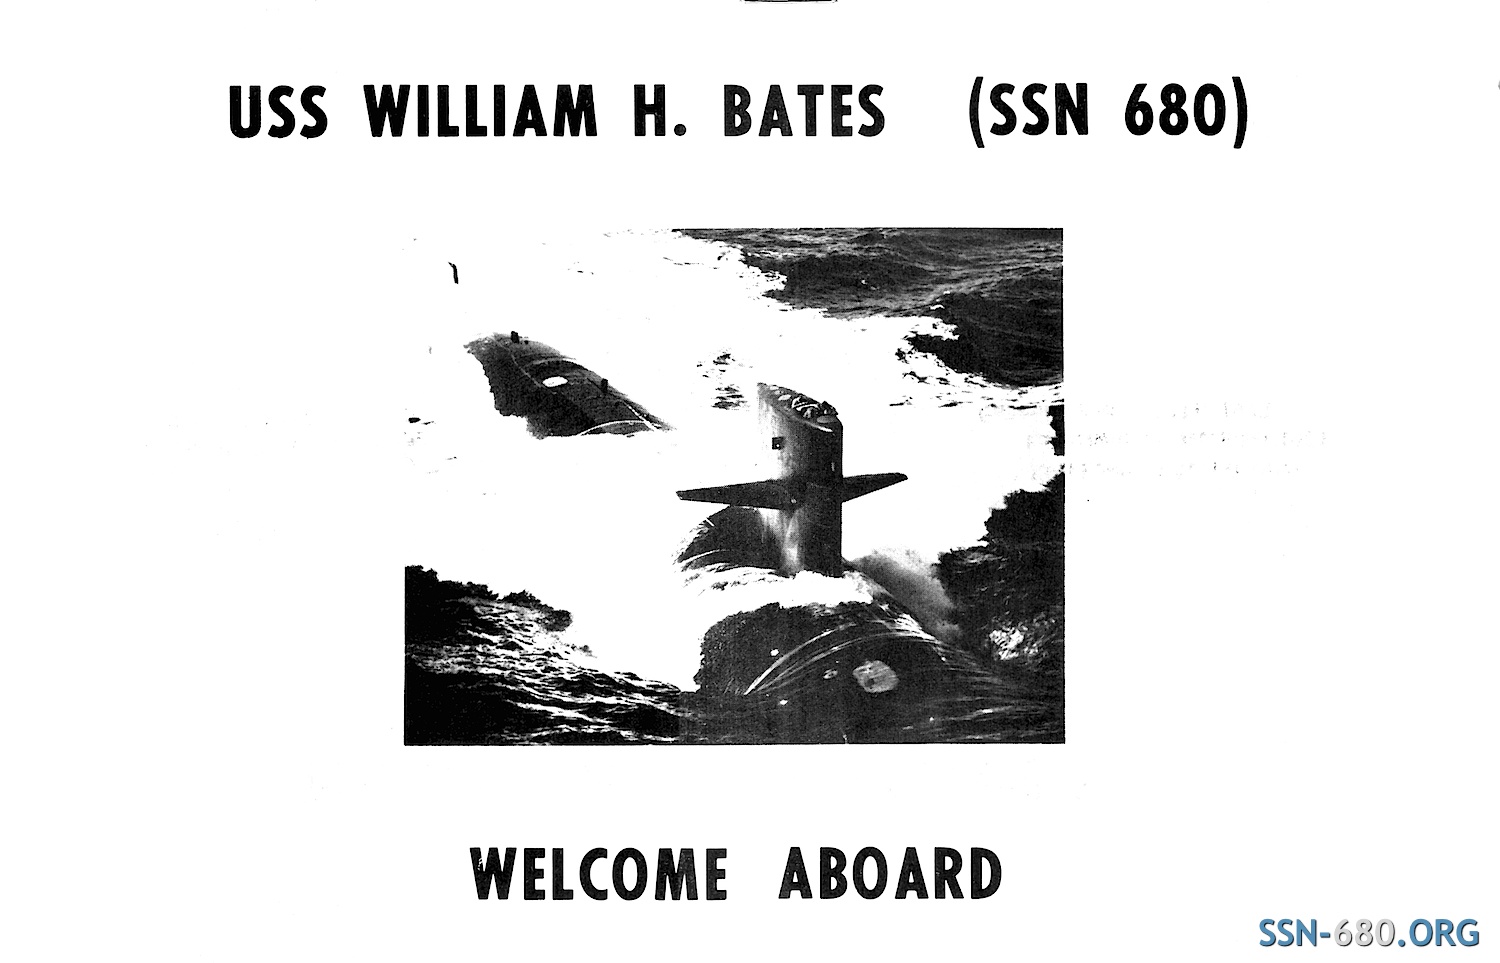 Welcome Aboard brochure of the USS WILLIAM H. BATES (SSN 680) circa 1986.